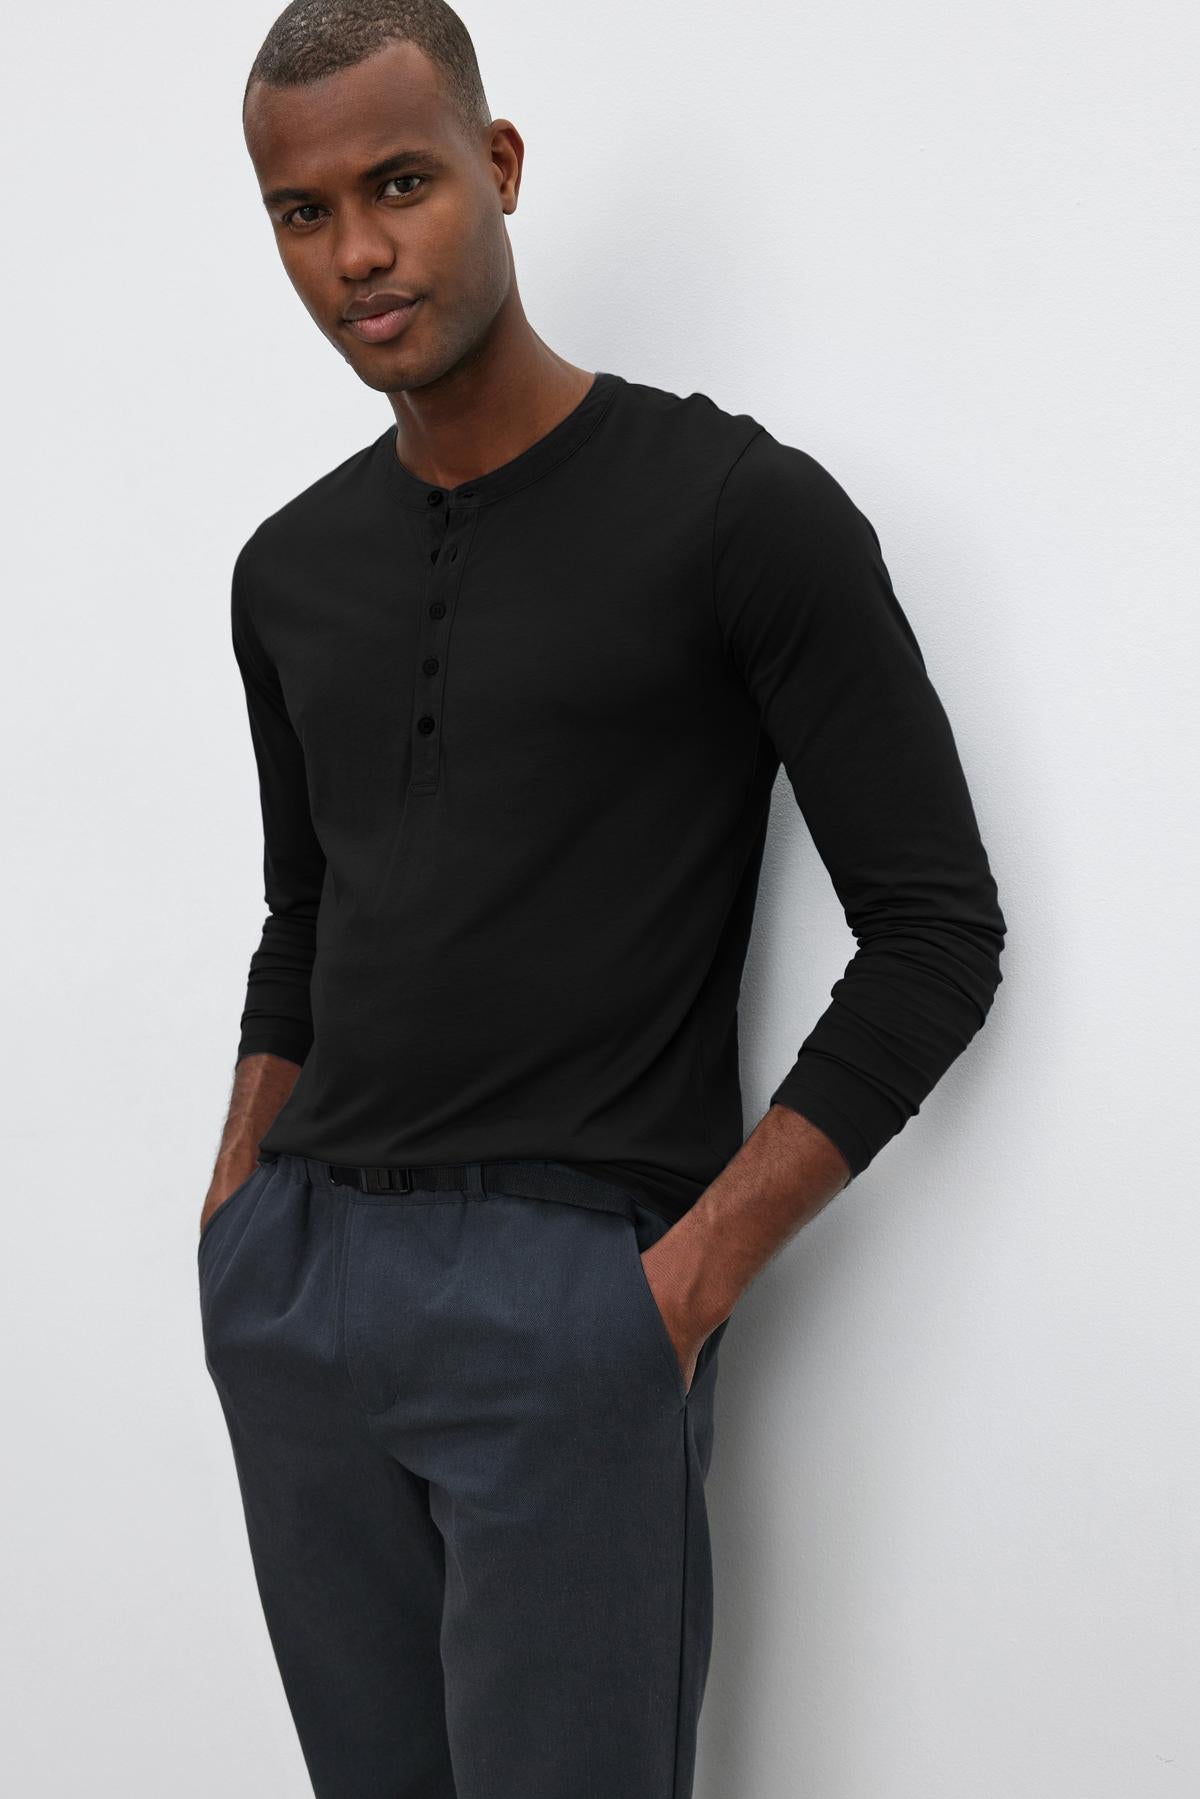   A person stands against a plain background, wearing a black long-sleeve ALVARO HENLEY by Velvet by Graham & Spencer and dark pants, with hands in pockets. 